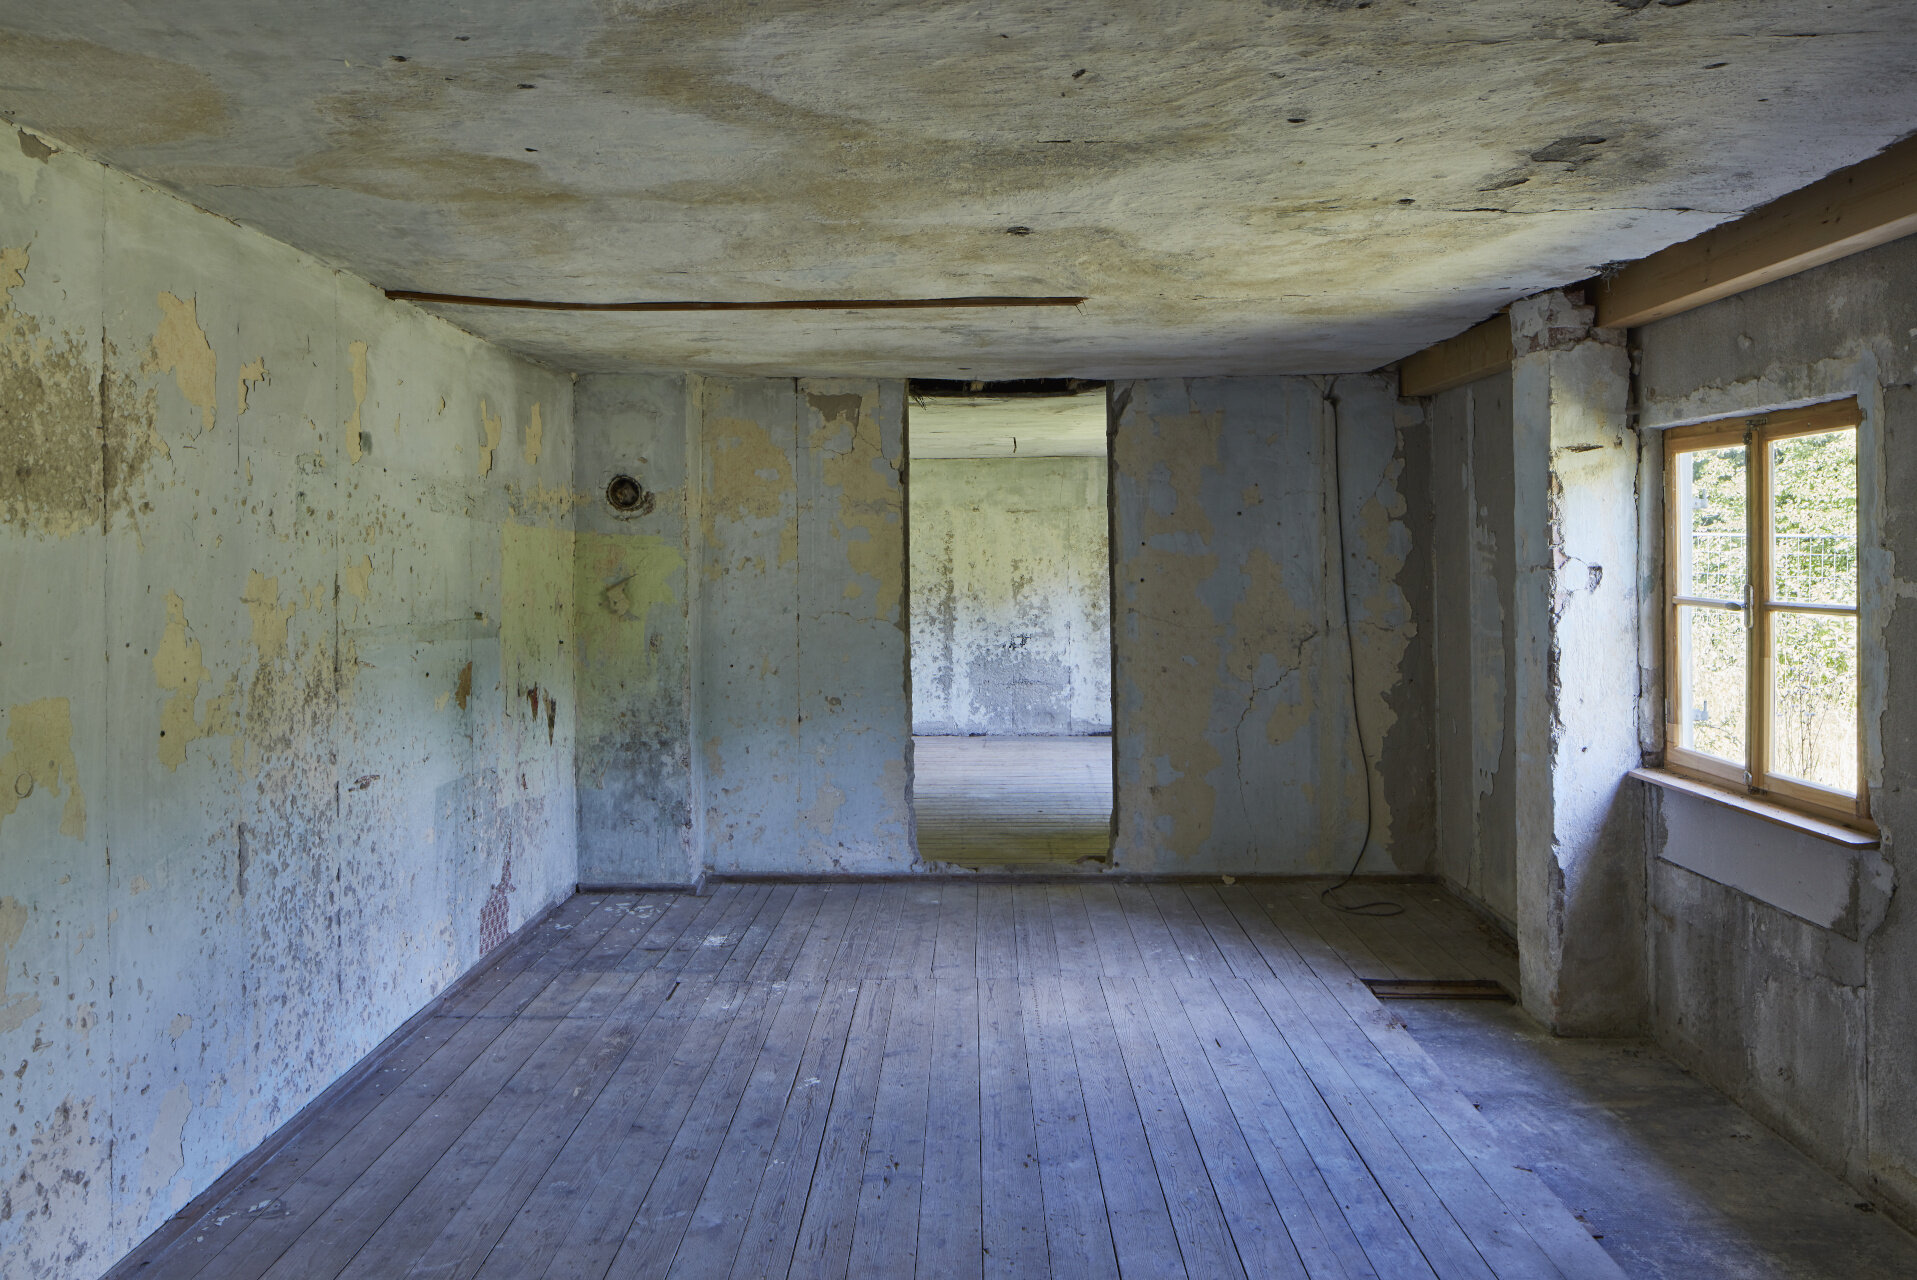 Two rooms with bare concrete walls inside the empty barrack. The room has windows but no doors.  